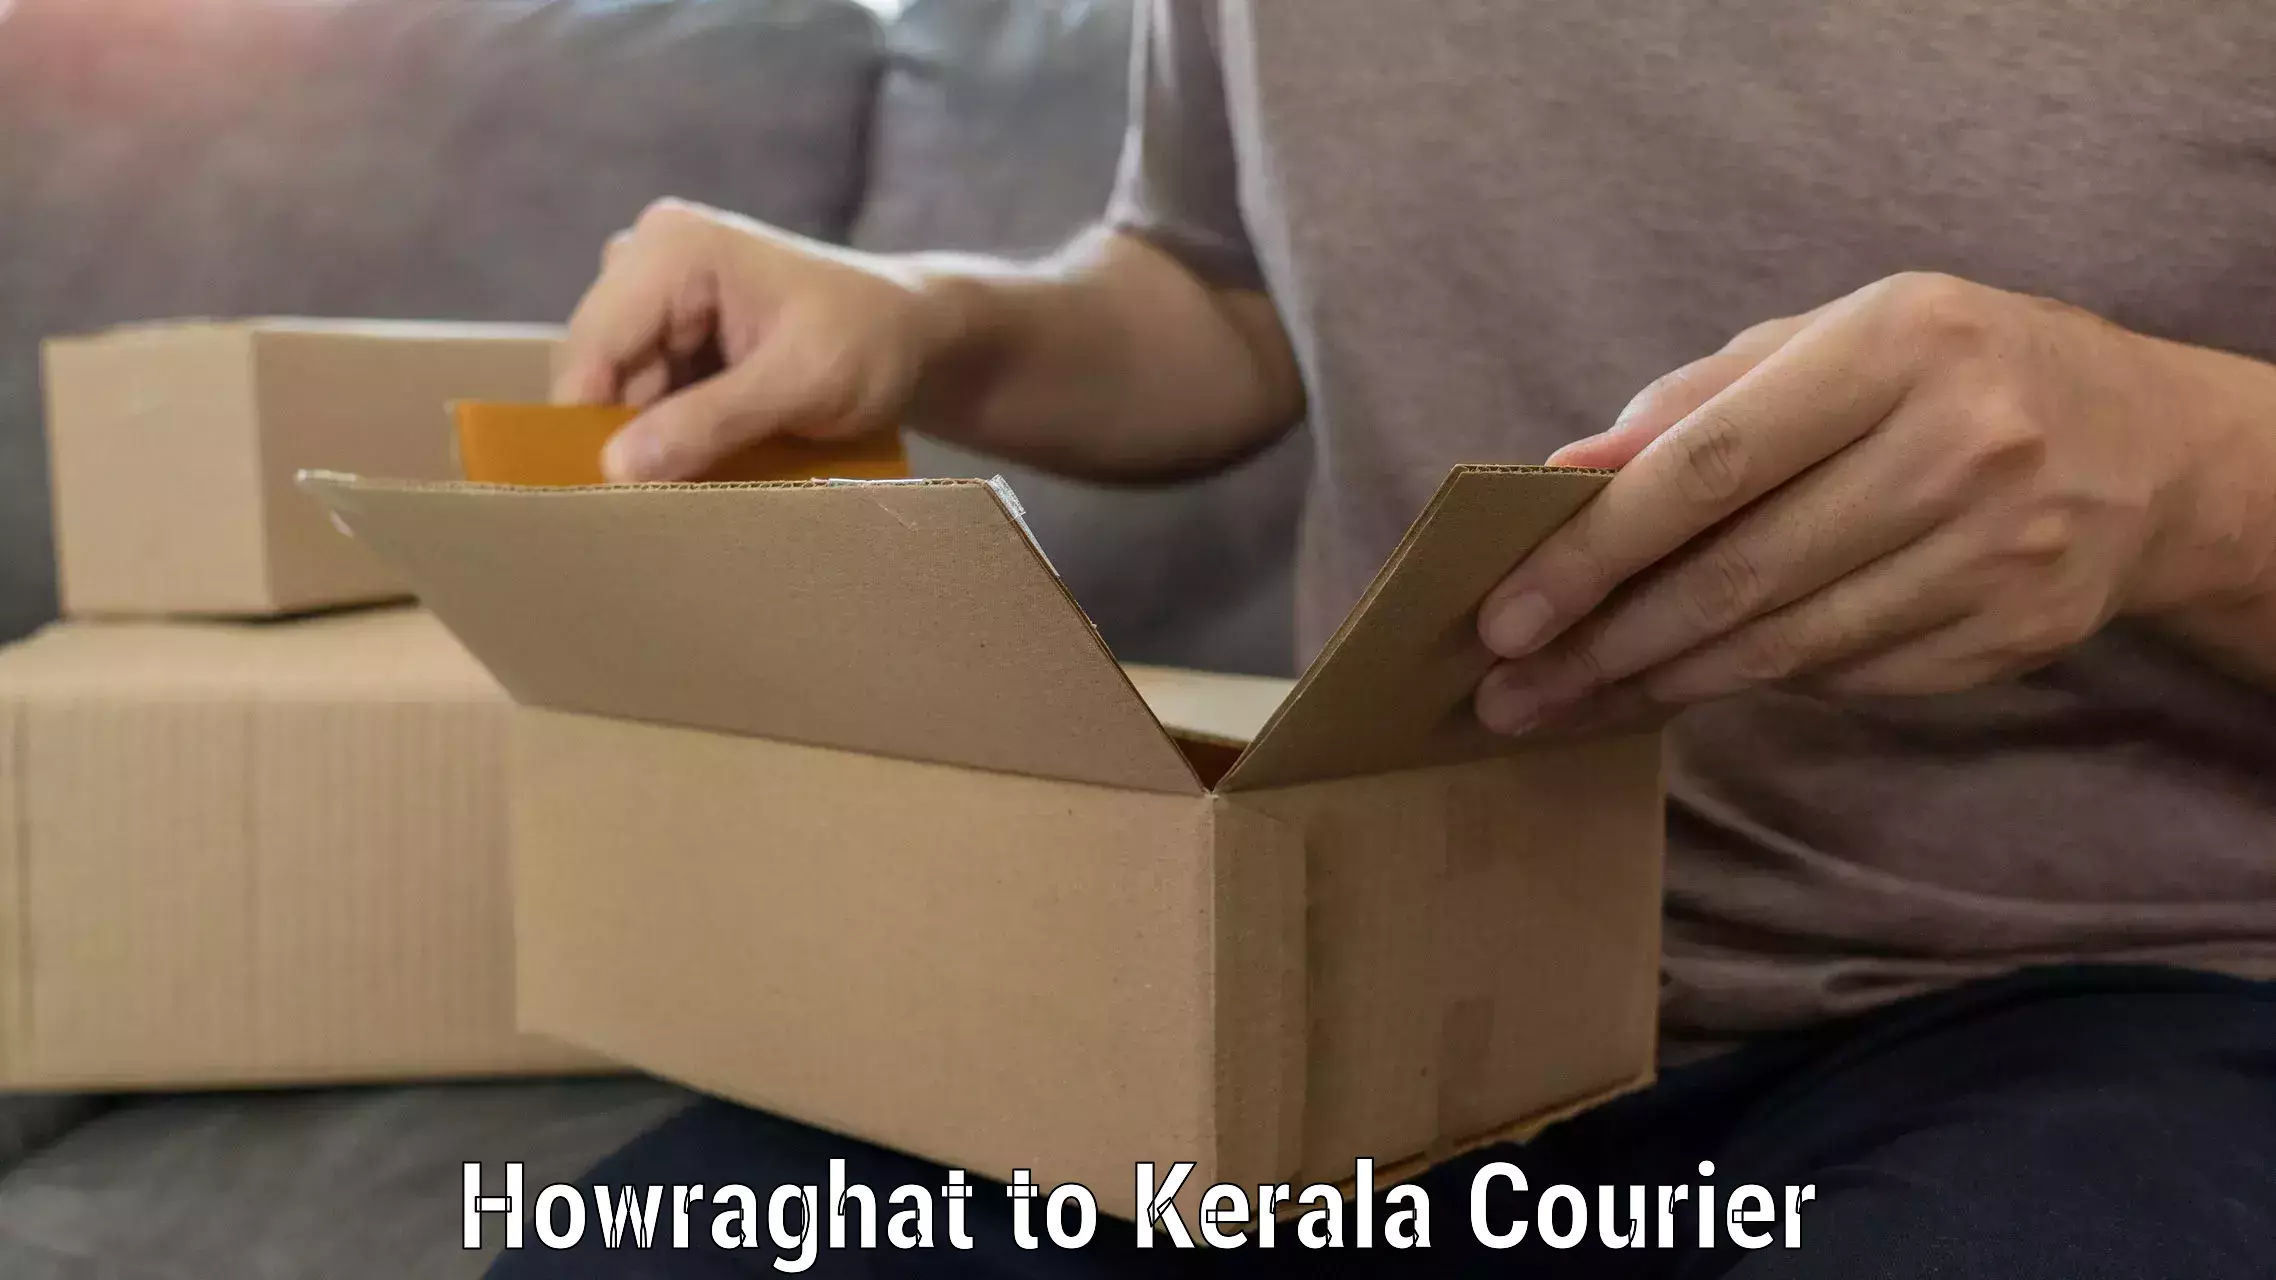 Home relocation solutions Howraghat to Kerala